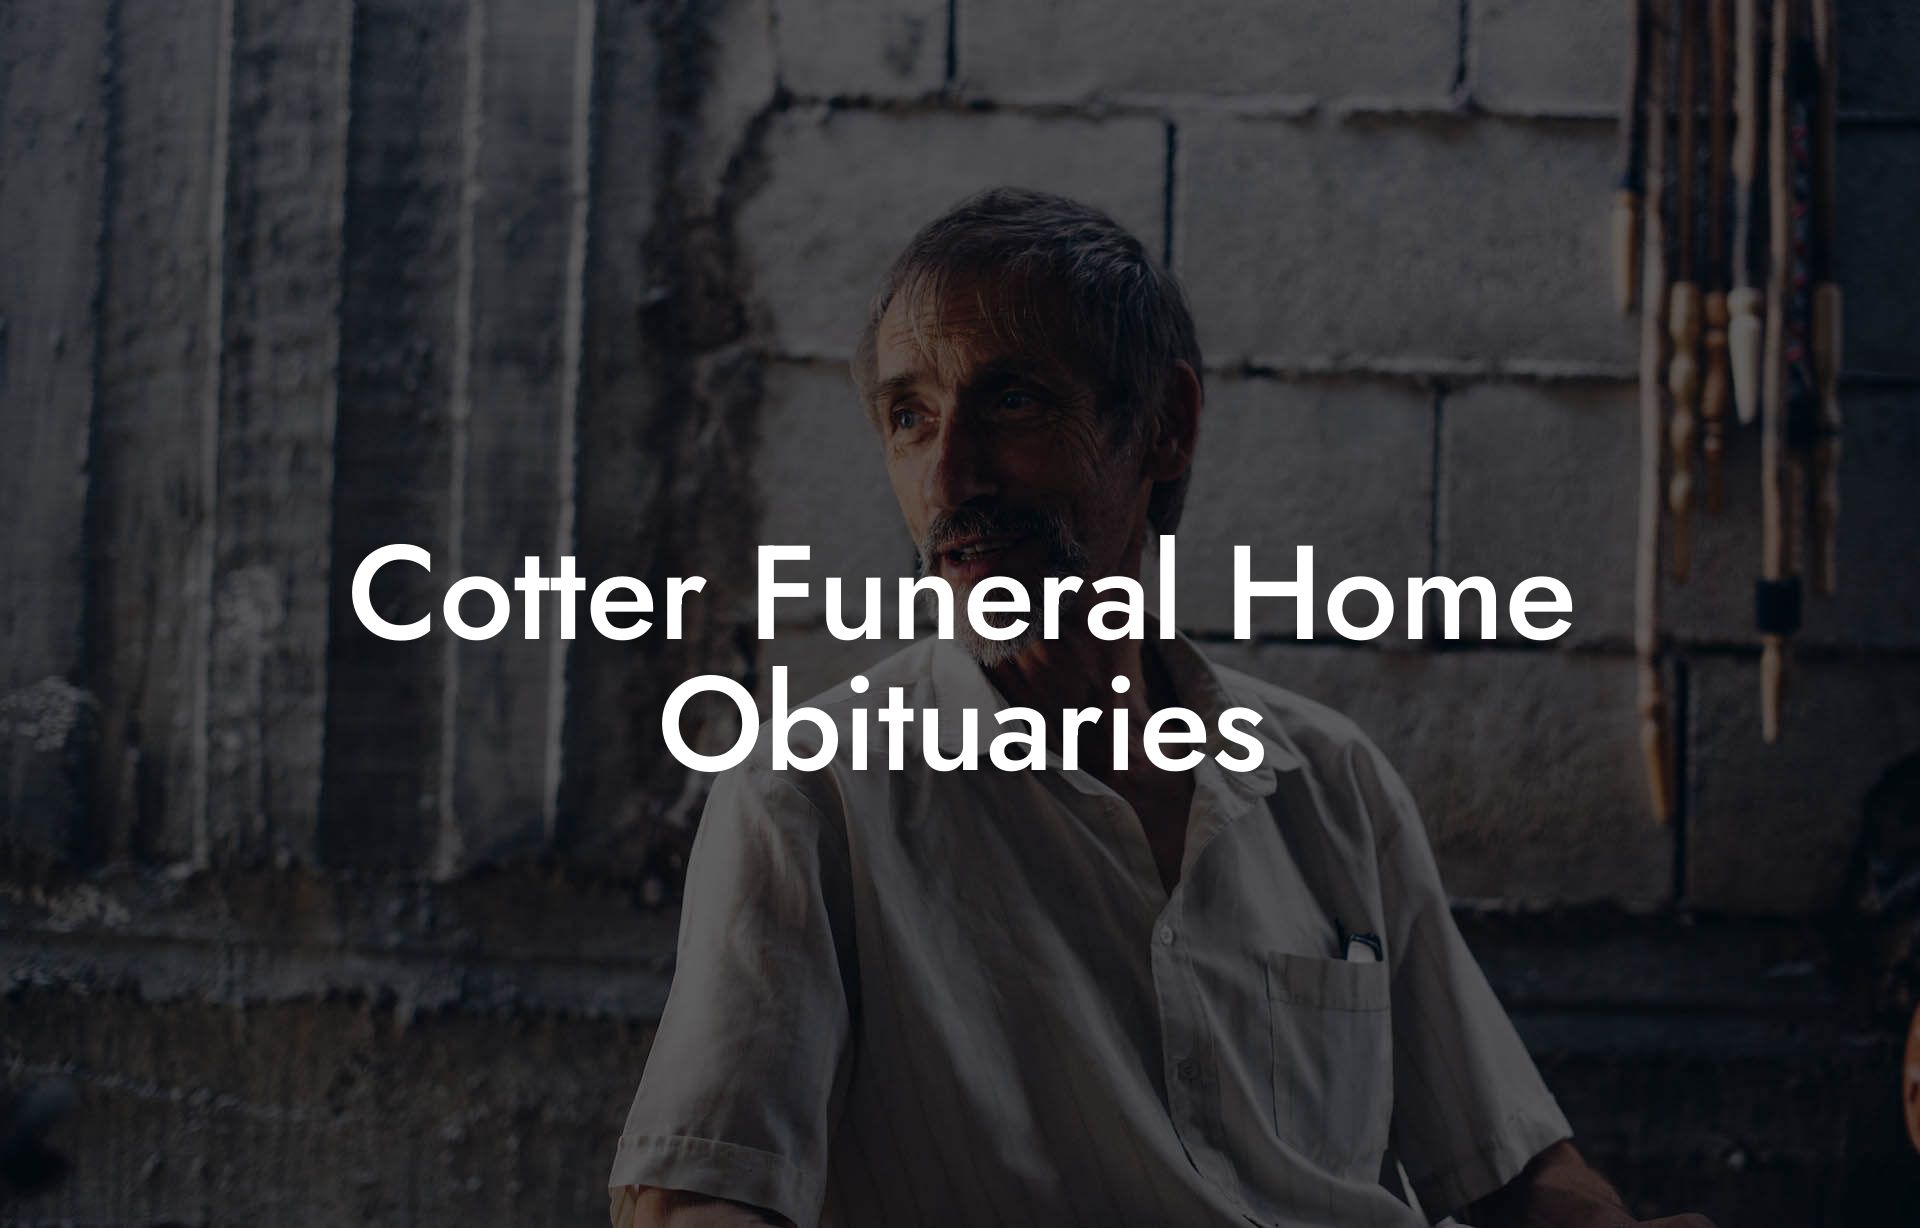 Cotter Funeral Home Obituaries